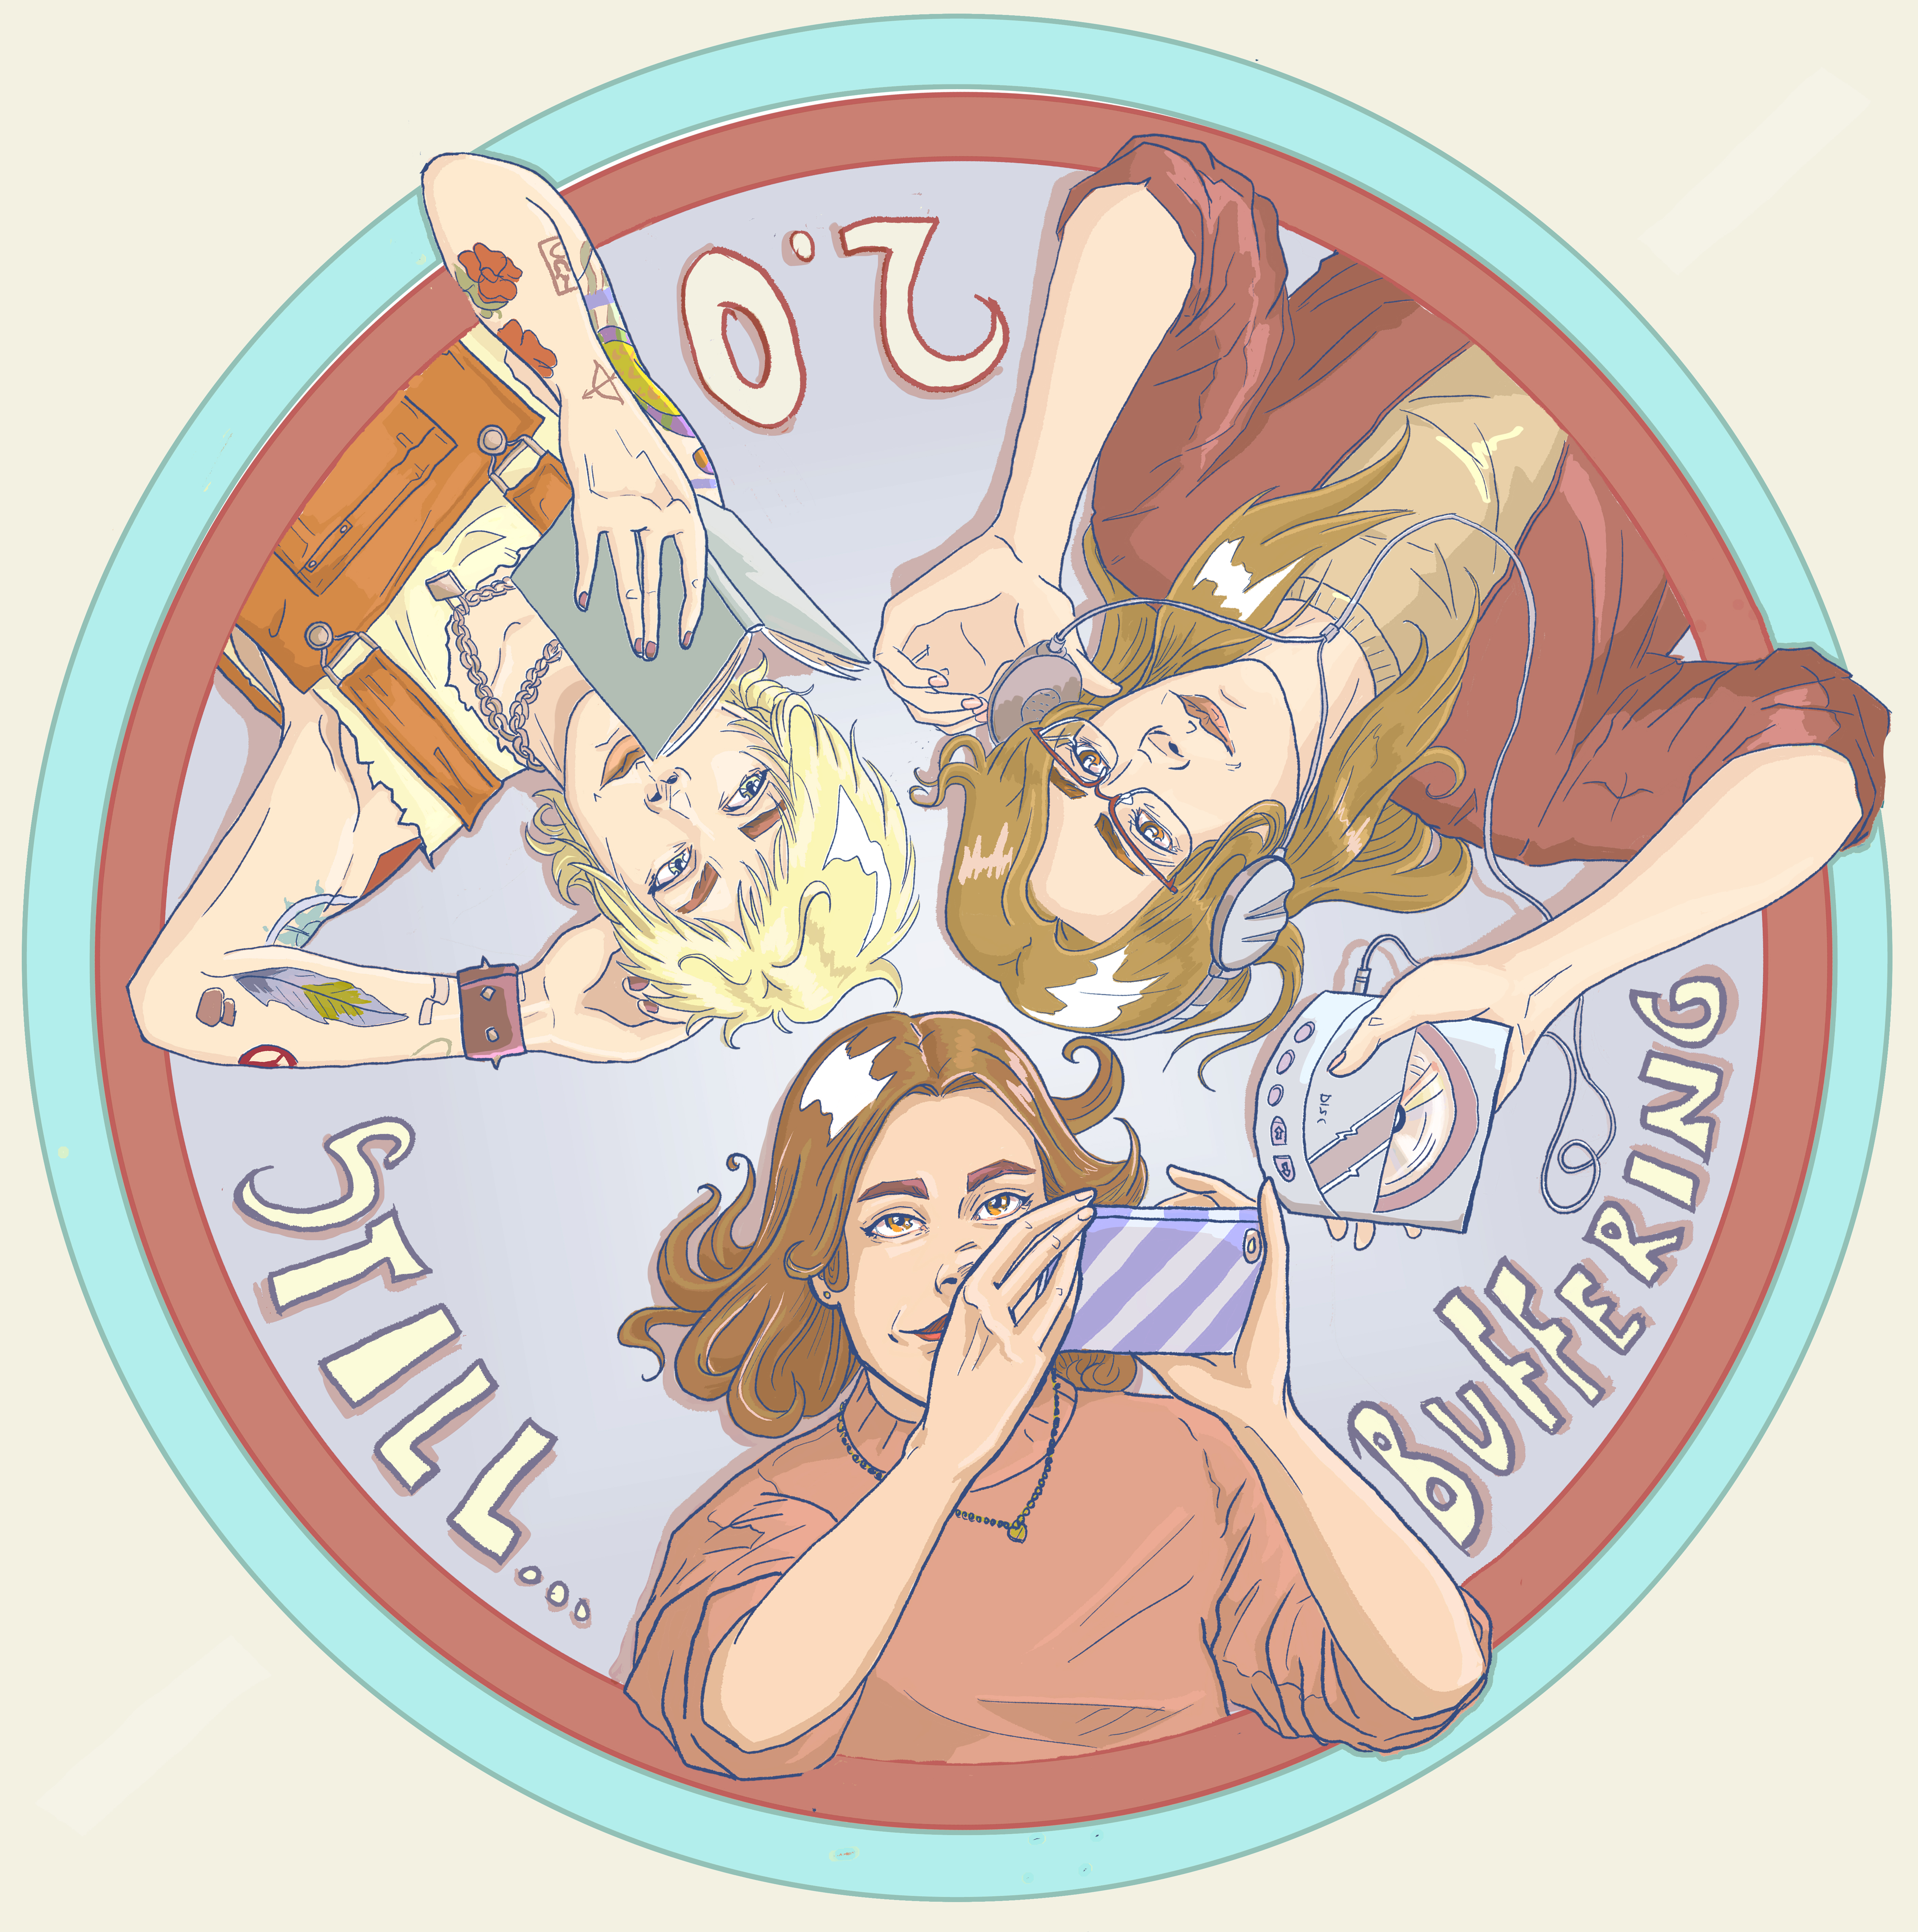 An illustration of Teylor Smirl, Rileigh Smirl, and Sydnee Mcelroy lying on their backs inside a circle. Teylor is reading a book. Rileigh is looking at her phone. Sydnee is listening to a walkman. Between them it says Still... Buffering 2.0.